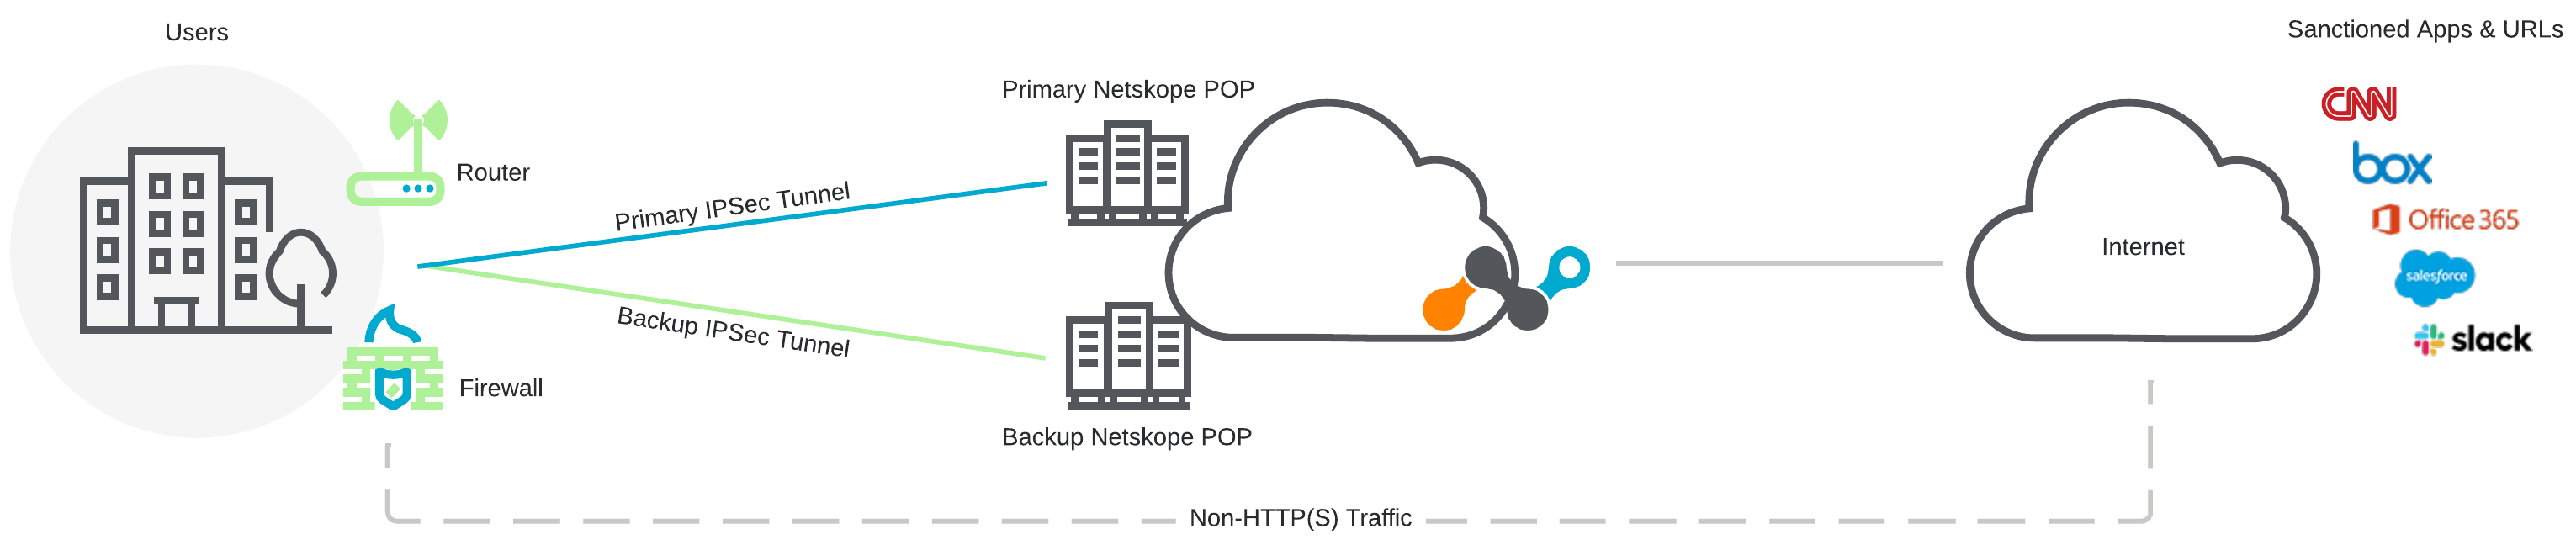 A network diagram showing the traffic workflow for IPSec Tunnels with Netskope Secure Web Gateway.